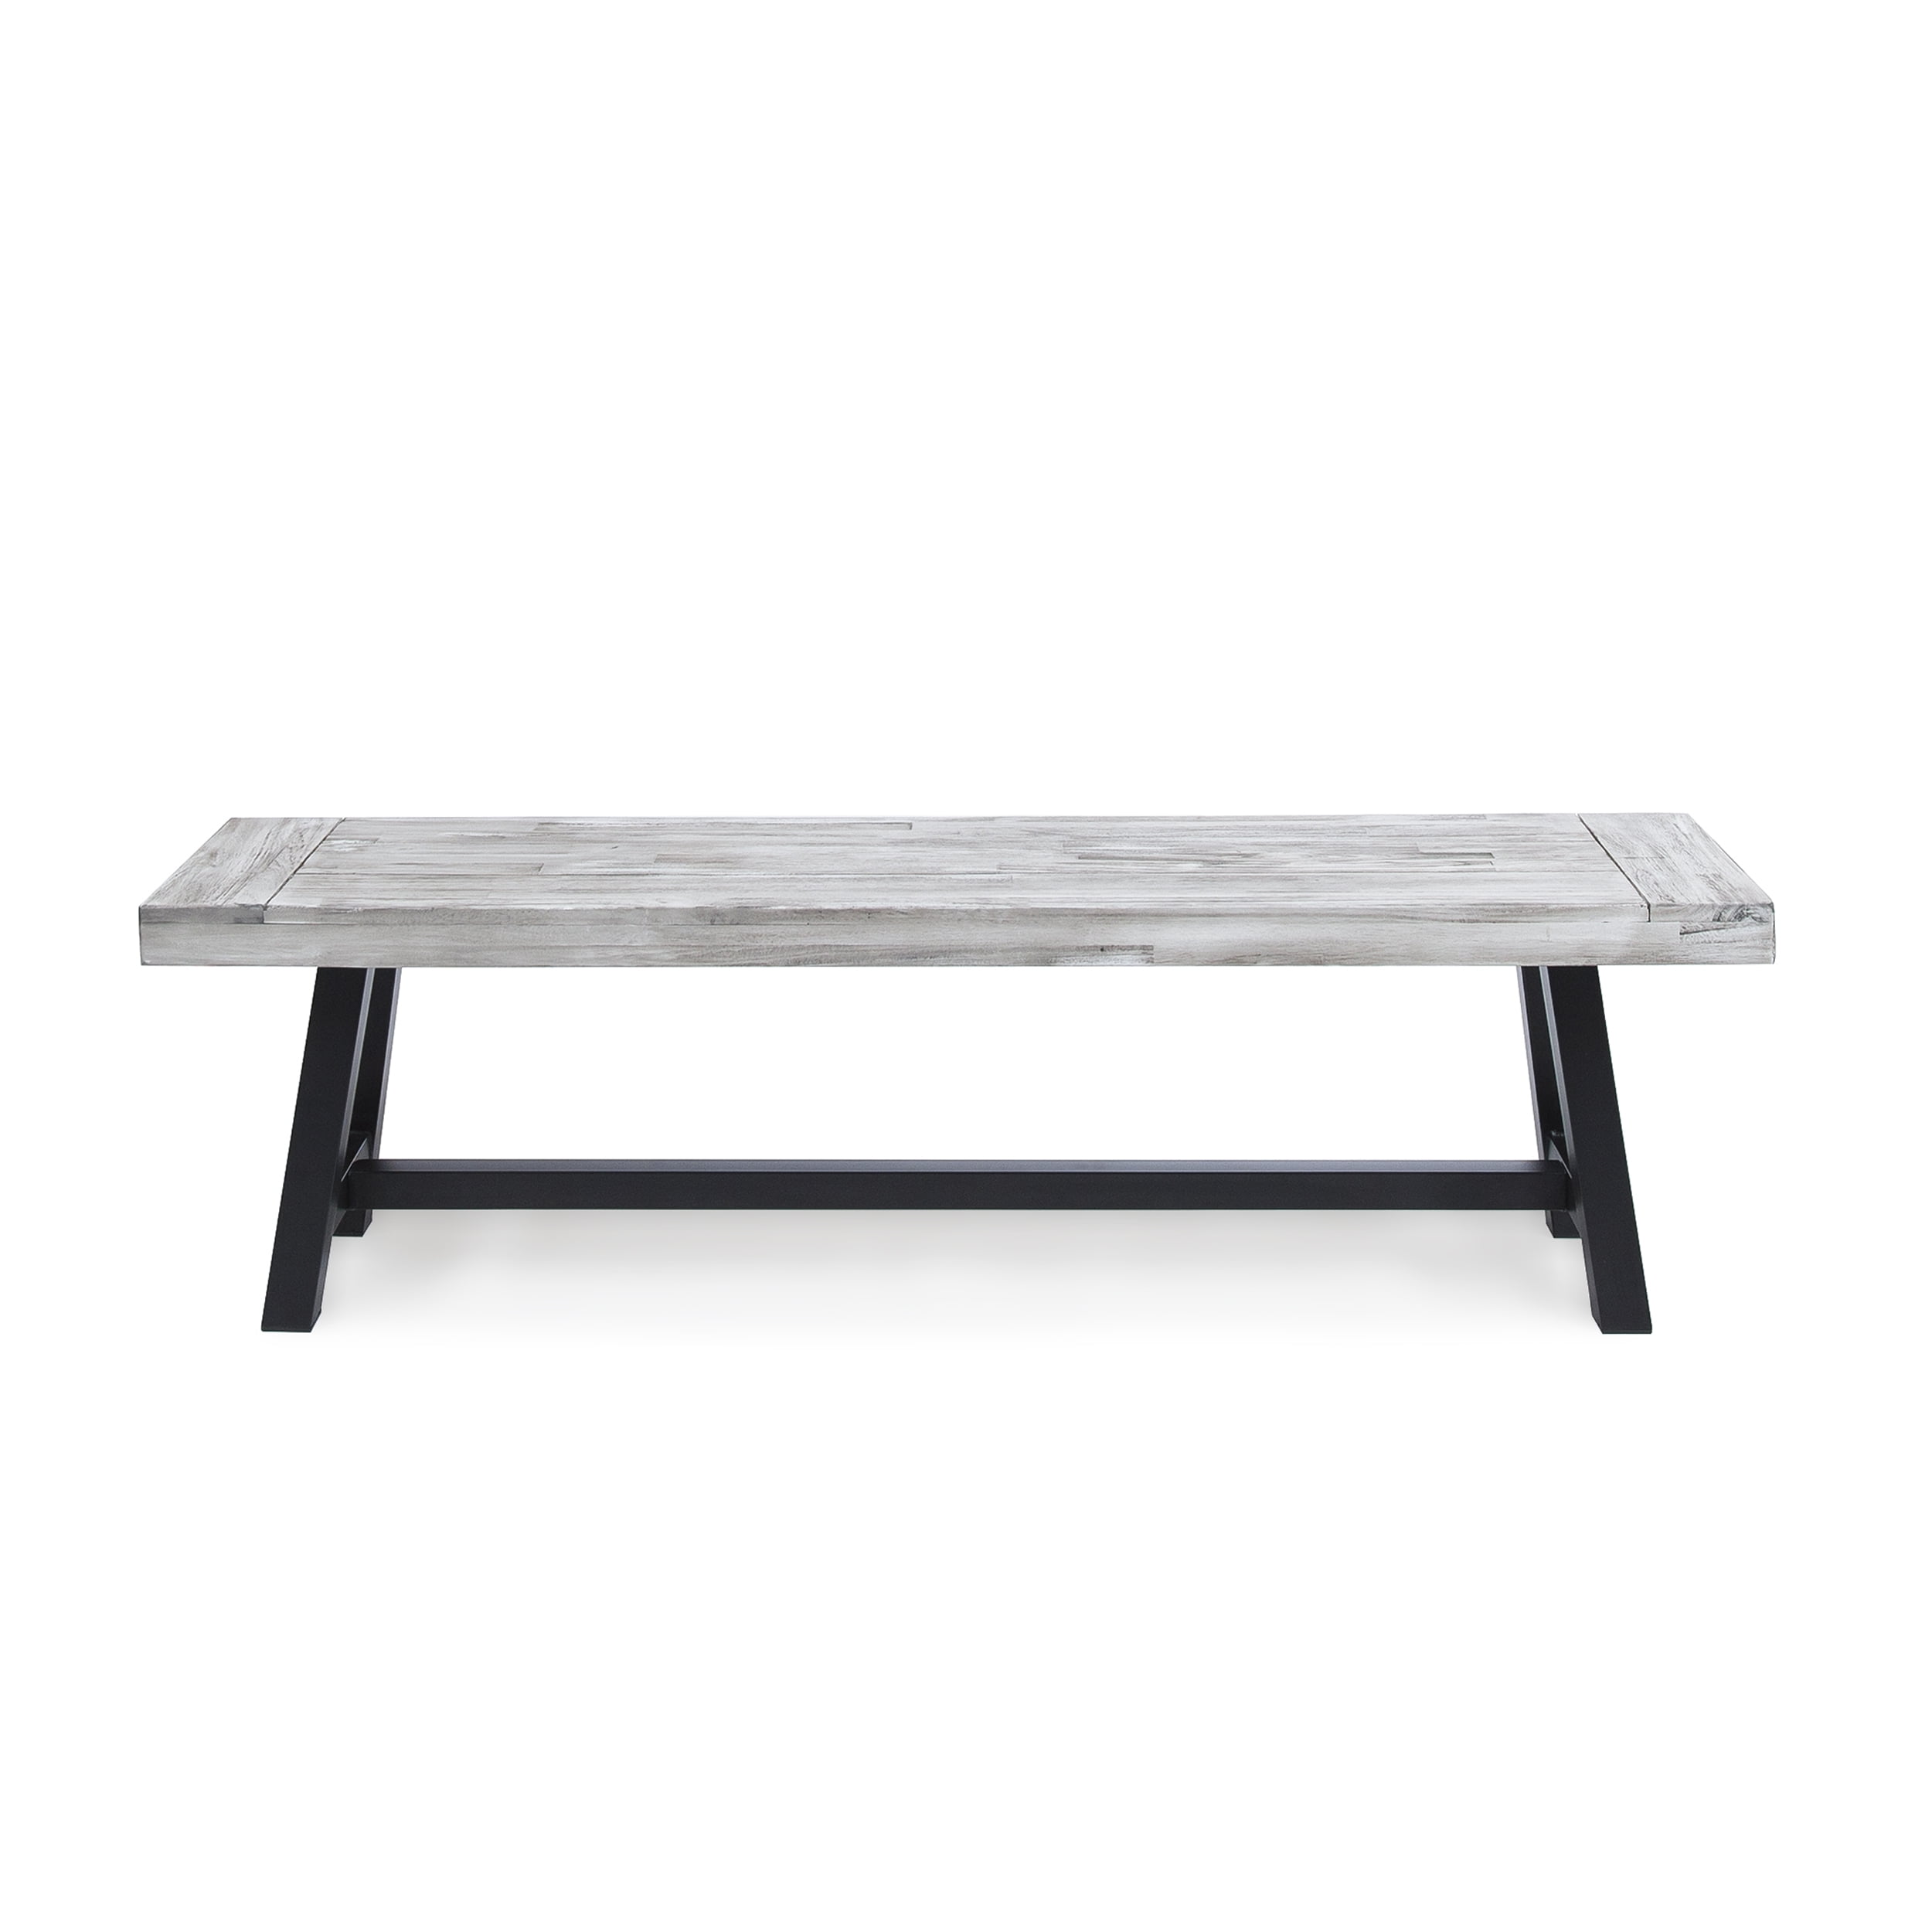 Cassie Outdoor Modern Industrial 3 Piece Acacia Wood Picnic with Benches Sandblasted Dark Brown and White Rustic Metal 